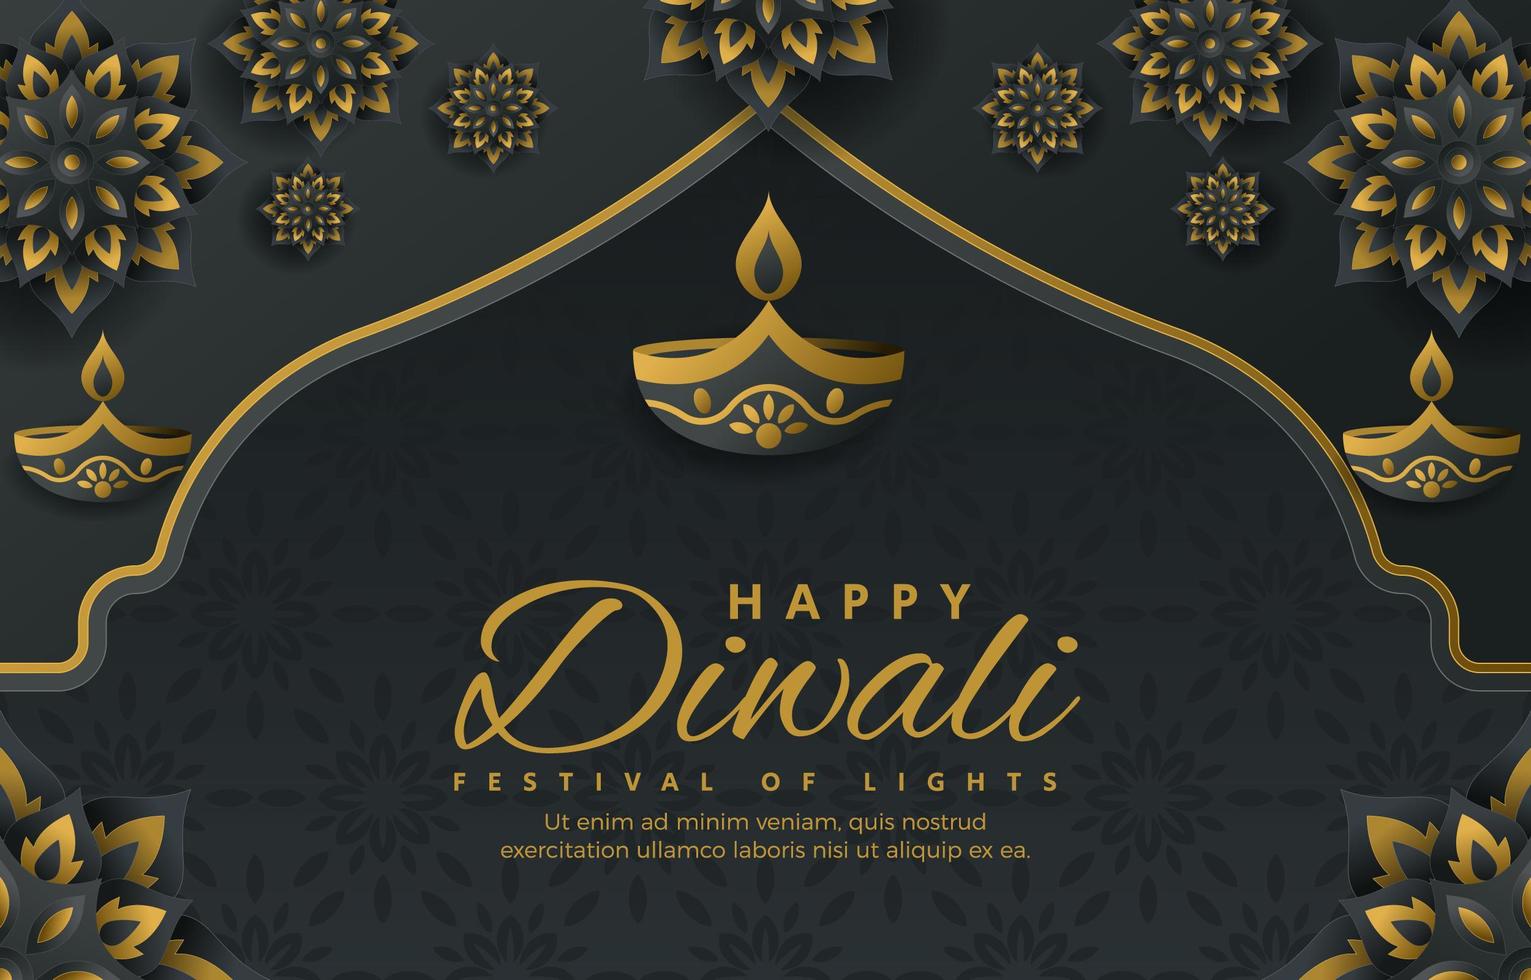 Dark Grey and Yellow Candles Flower Diwali Background vector